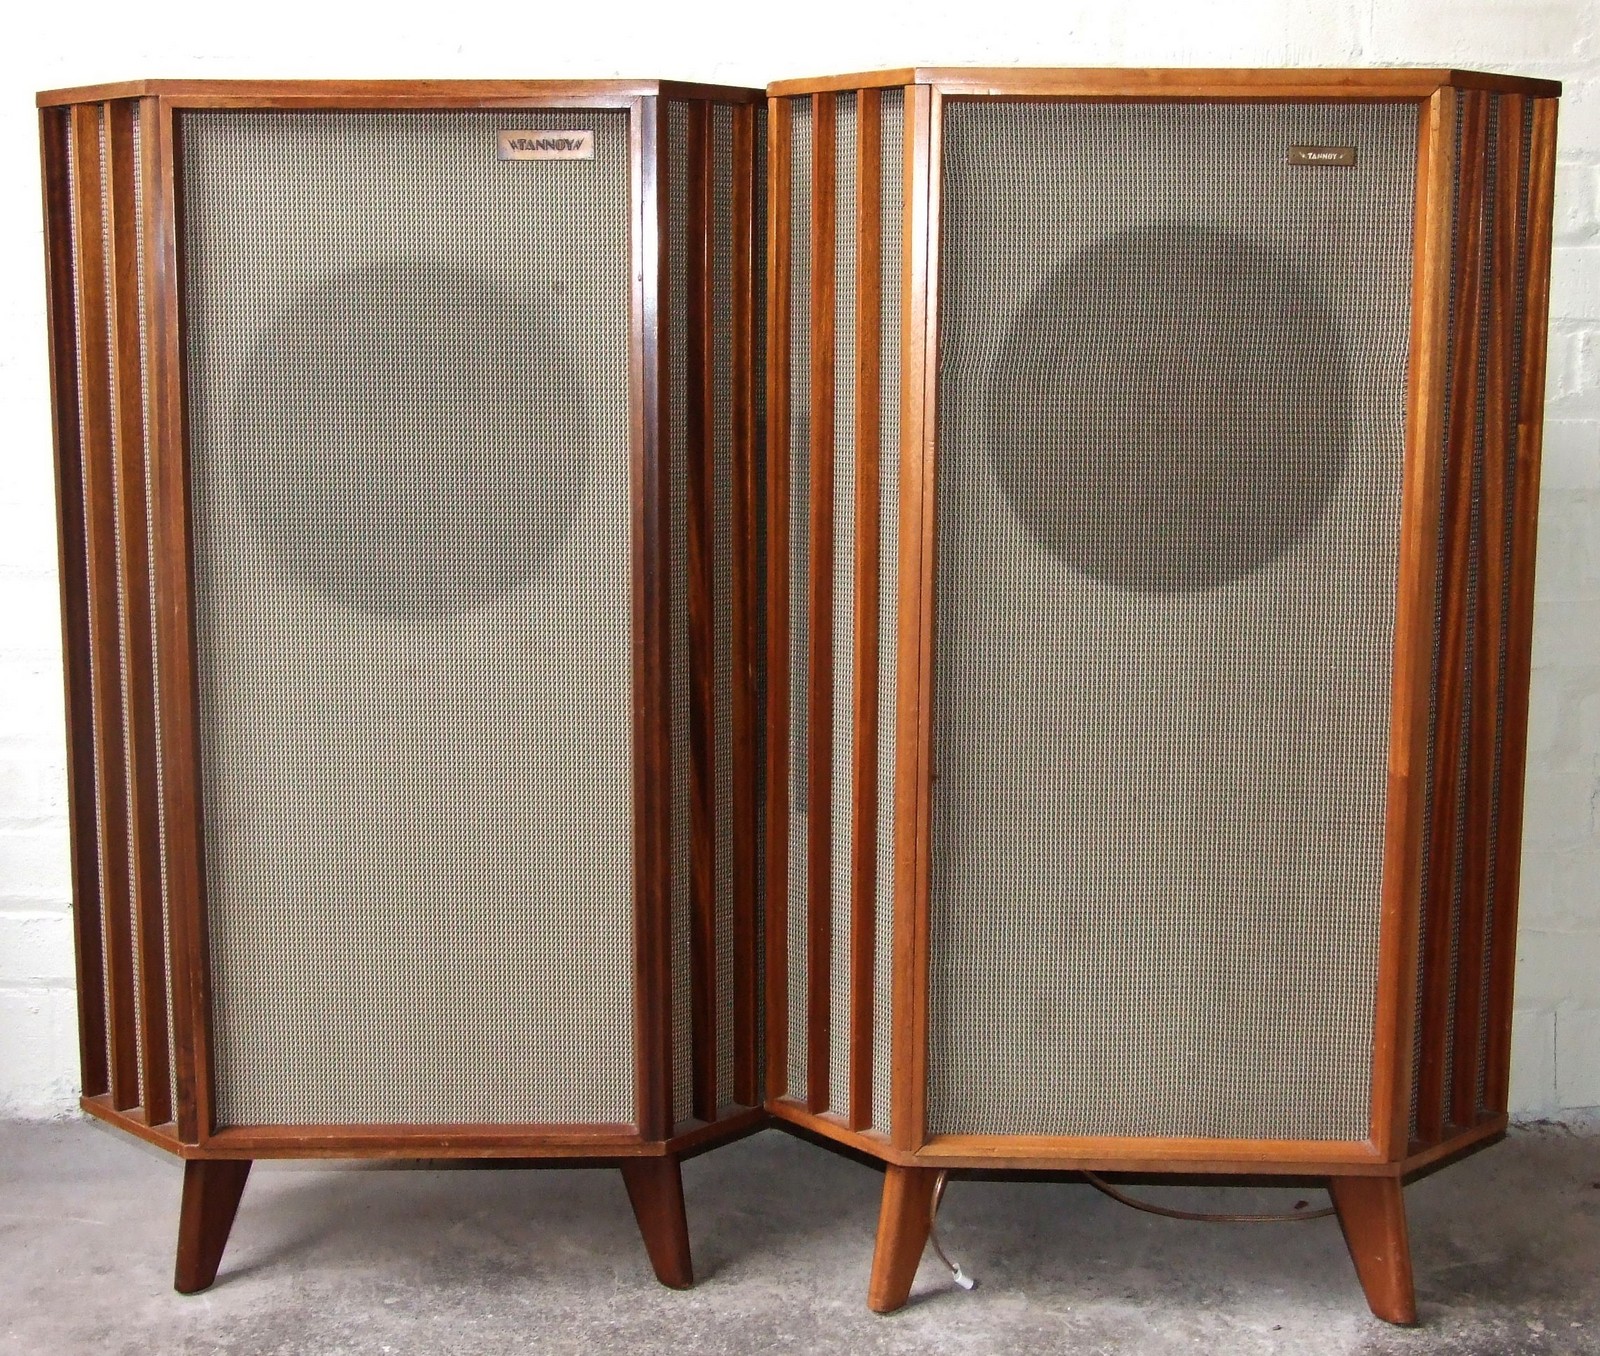 2 Tannoy Silver Monitor 12” Speakers (Circa 1950’s) Serial No’s 018031 and 015535 Type LSU/HF/12/L